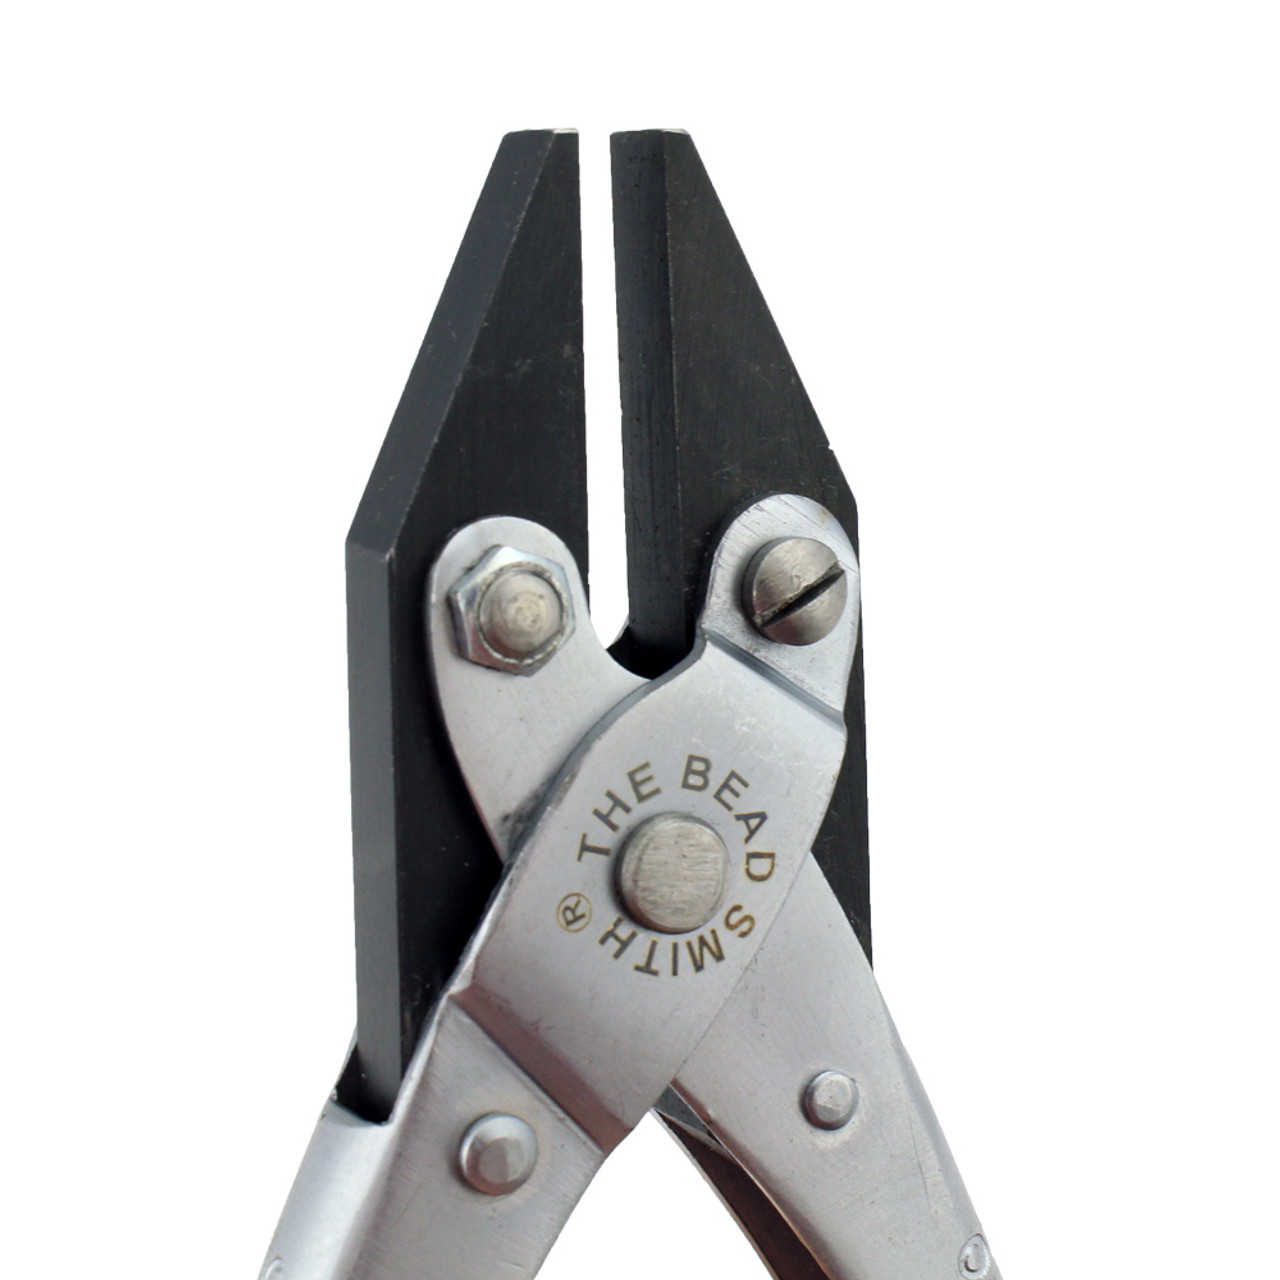 Parallel Action Chain Nose Smooth Jaw Pliers 5-1/2 with Spring